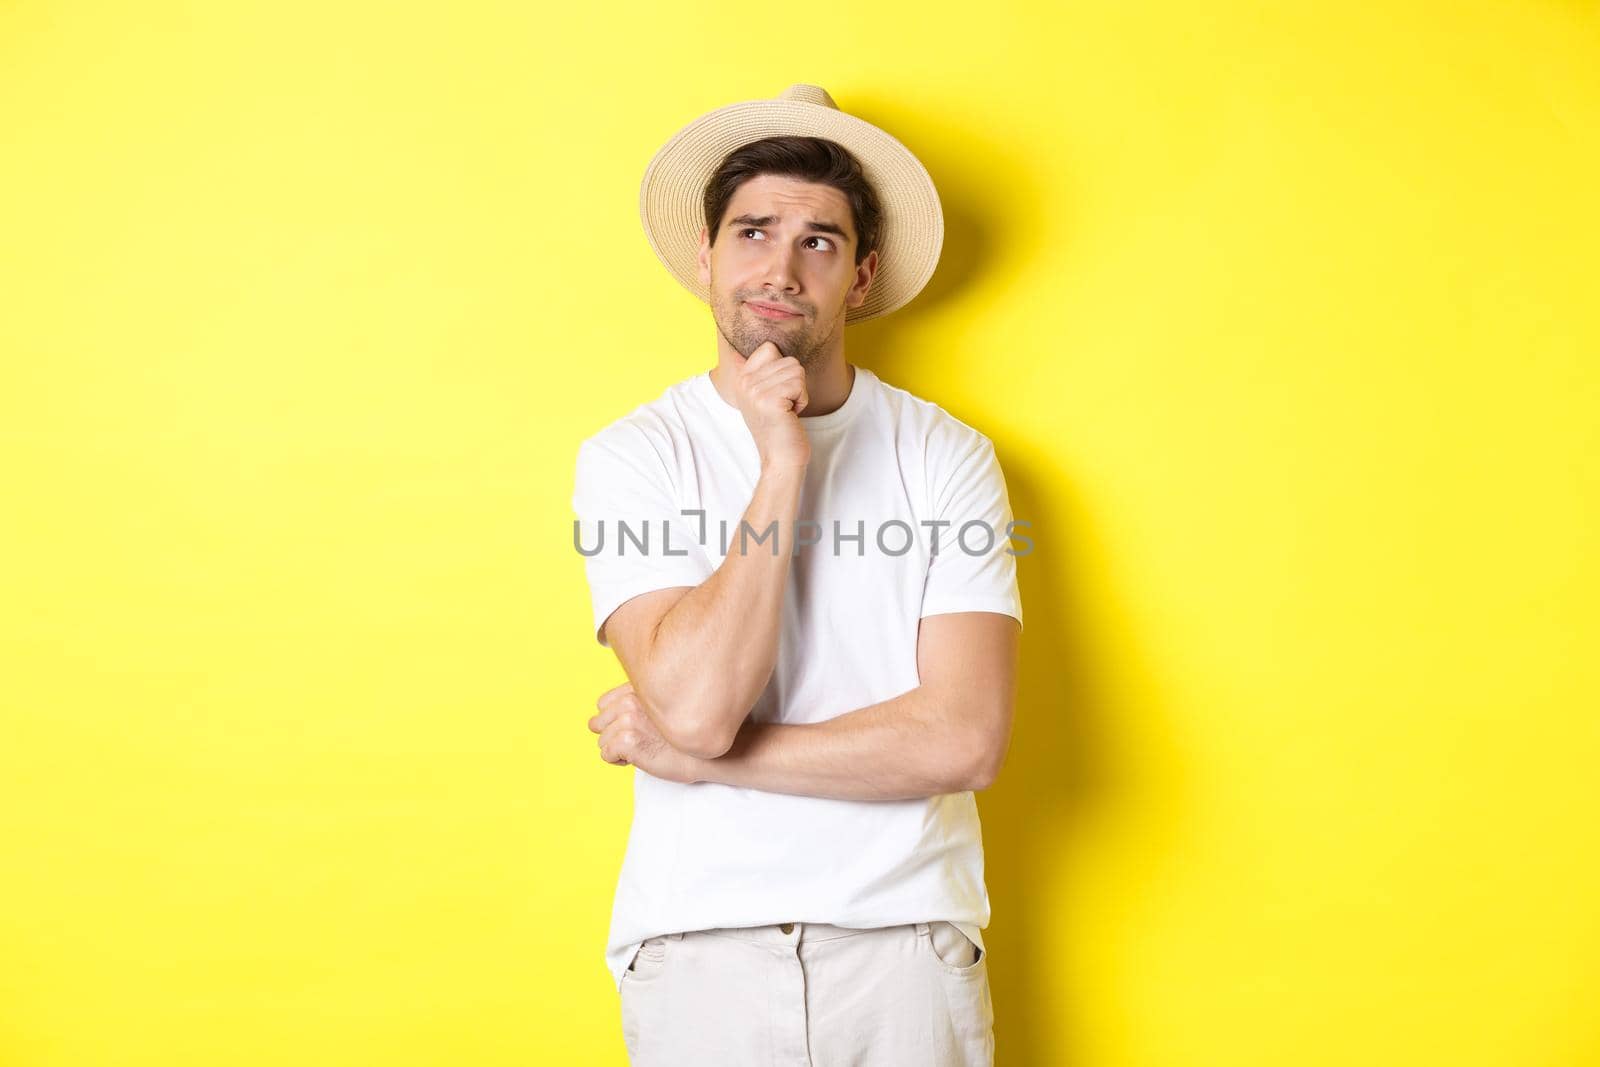 Concept of tourism and summer. Thoughtful man tourist pondering, looking at upper left corner and thinking, standing in straw hat and white t-shirt against yellow background.